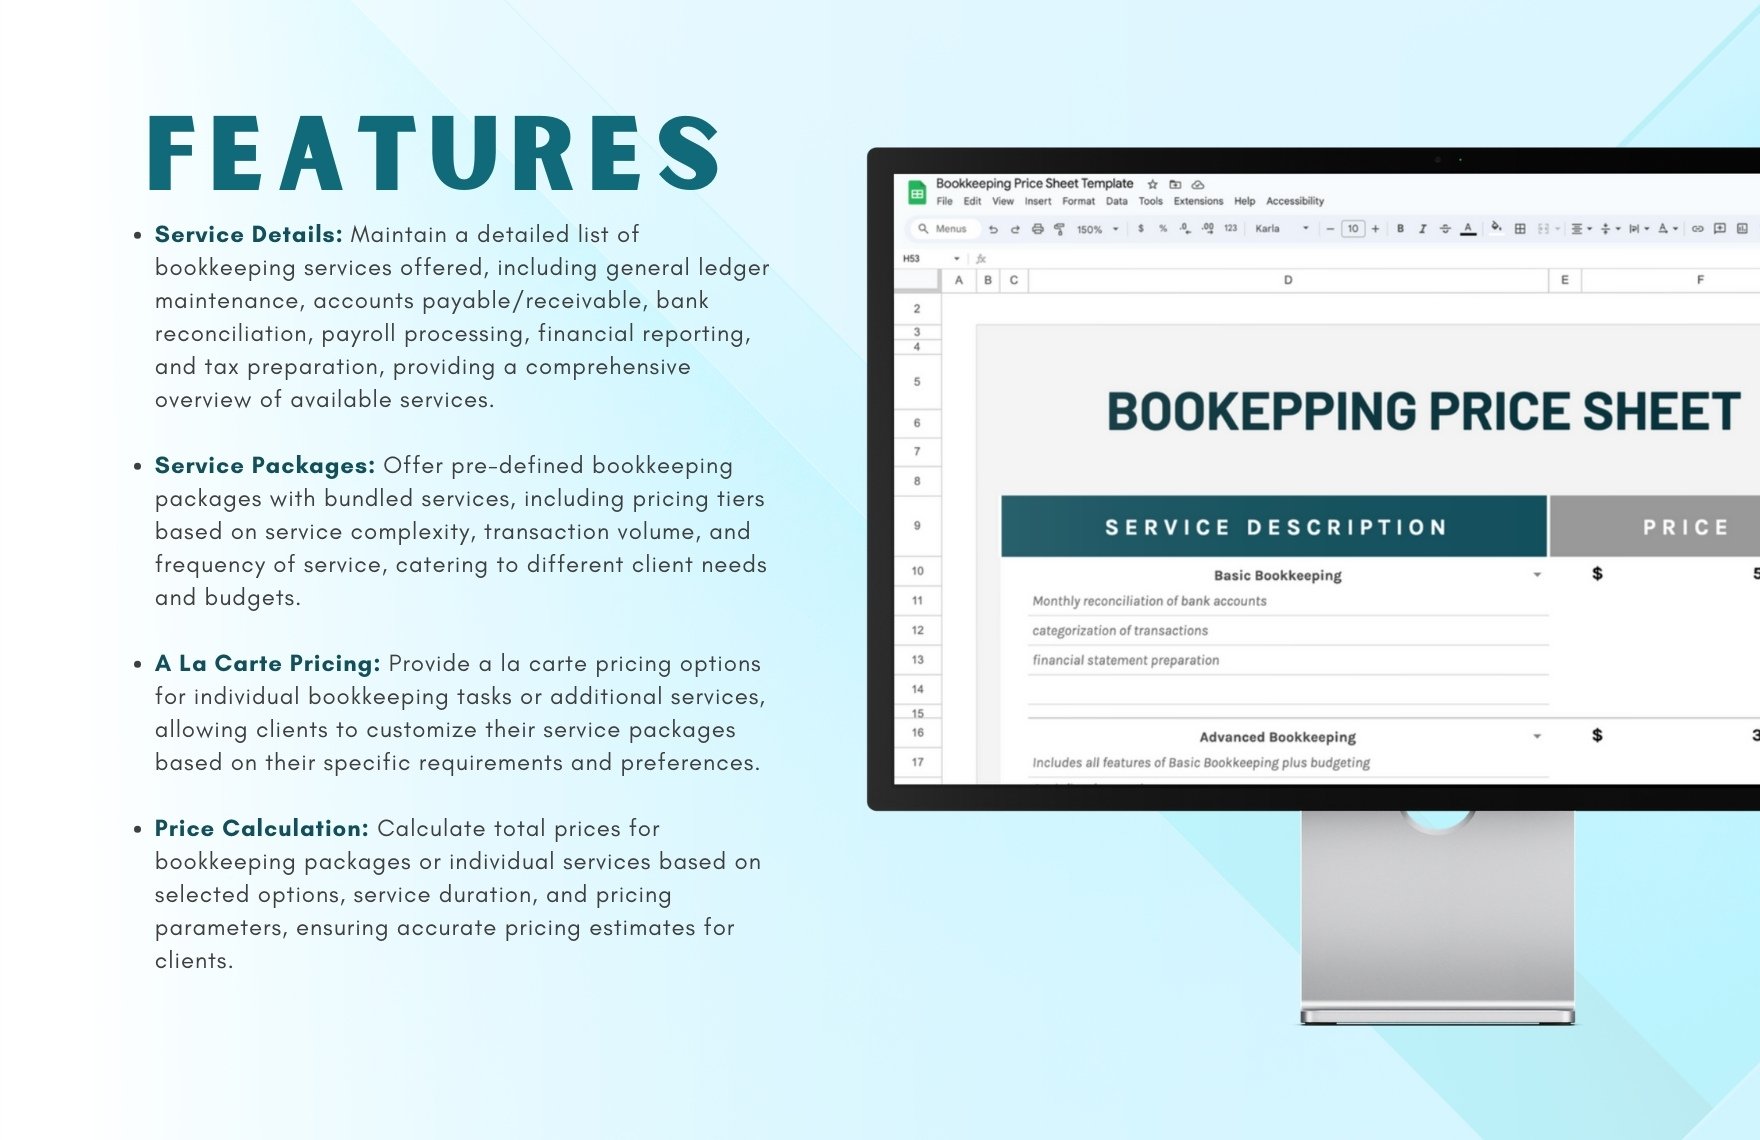 Bookkeeping Price Sheet Template